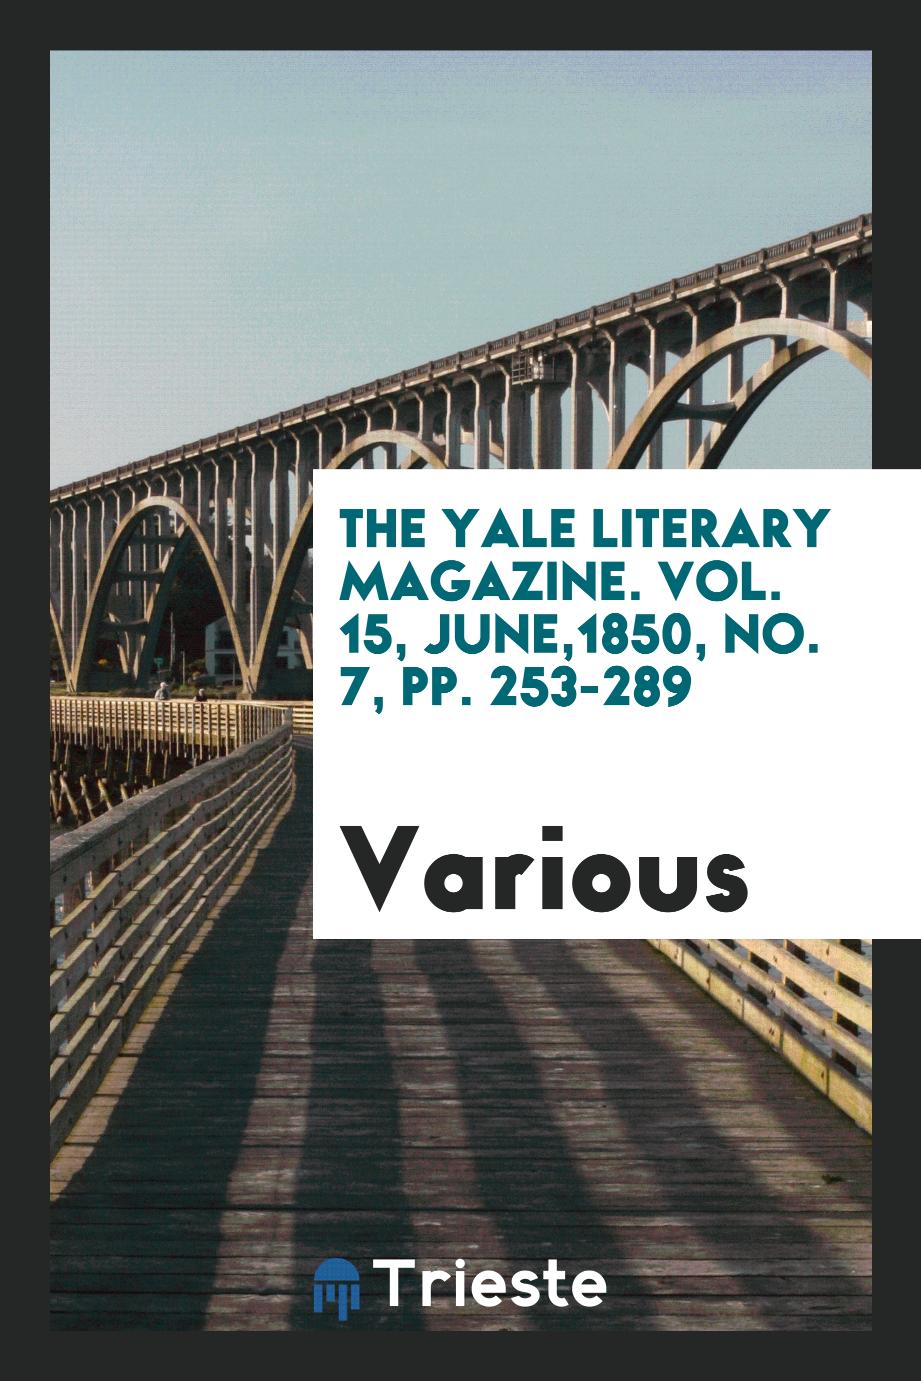 The Yale literary magazine. Vol. 15, June,1850, No. 7, pp. 253-289